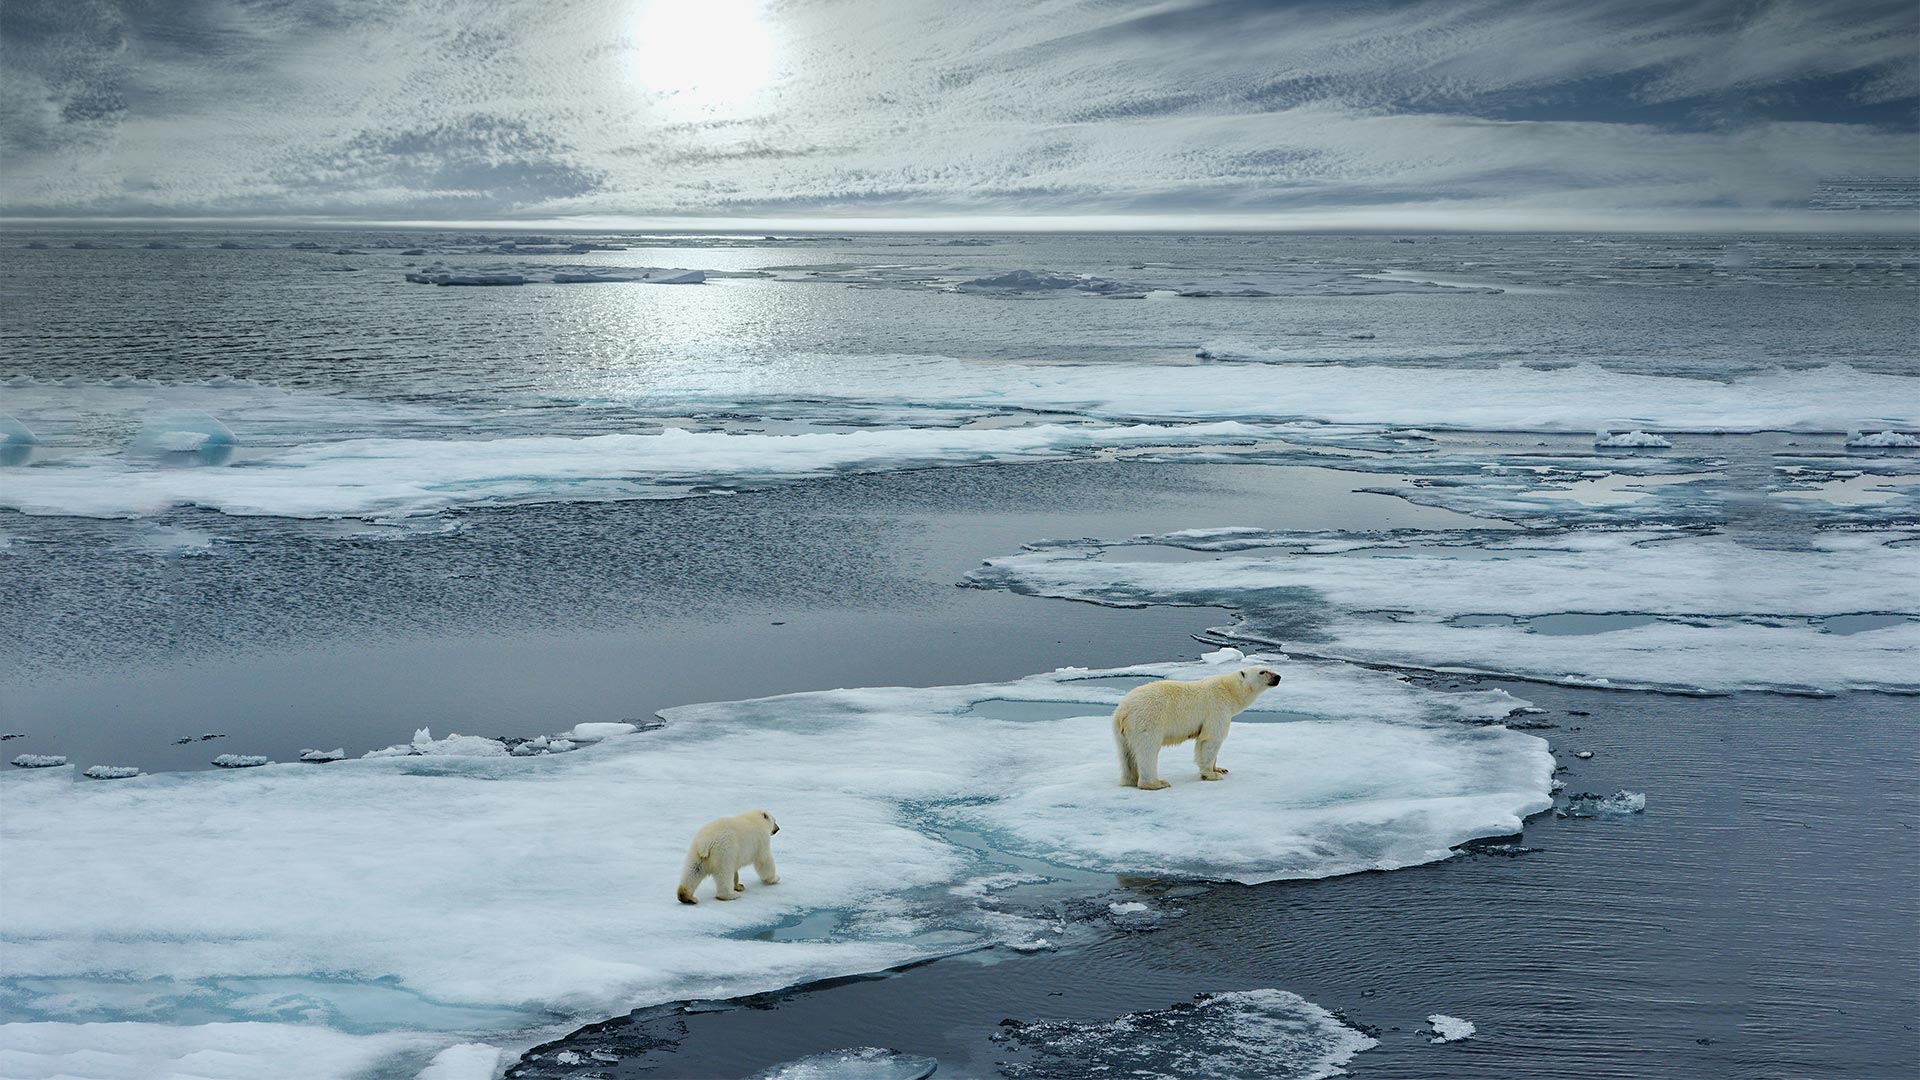 Polar bears standing in the middle of icebergs